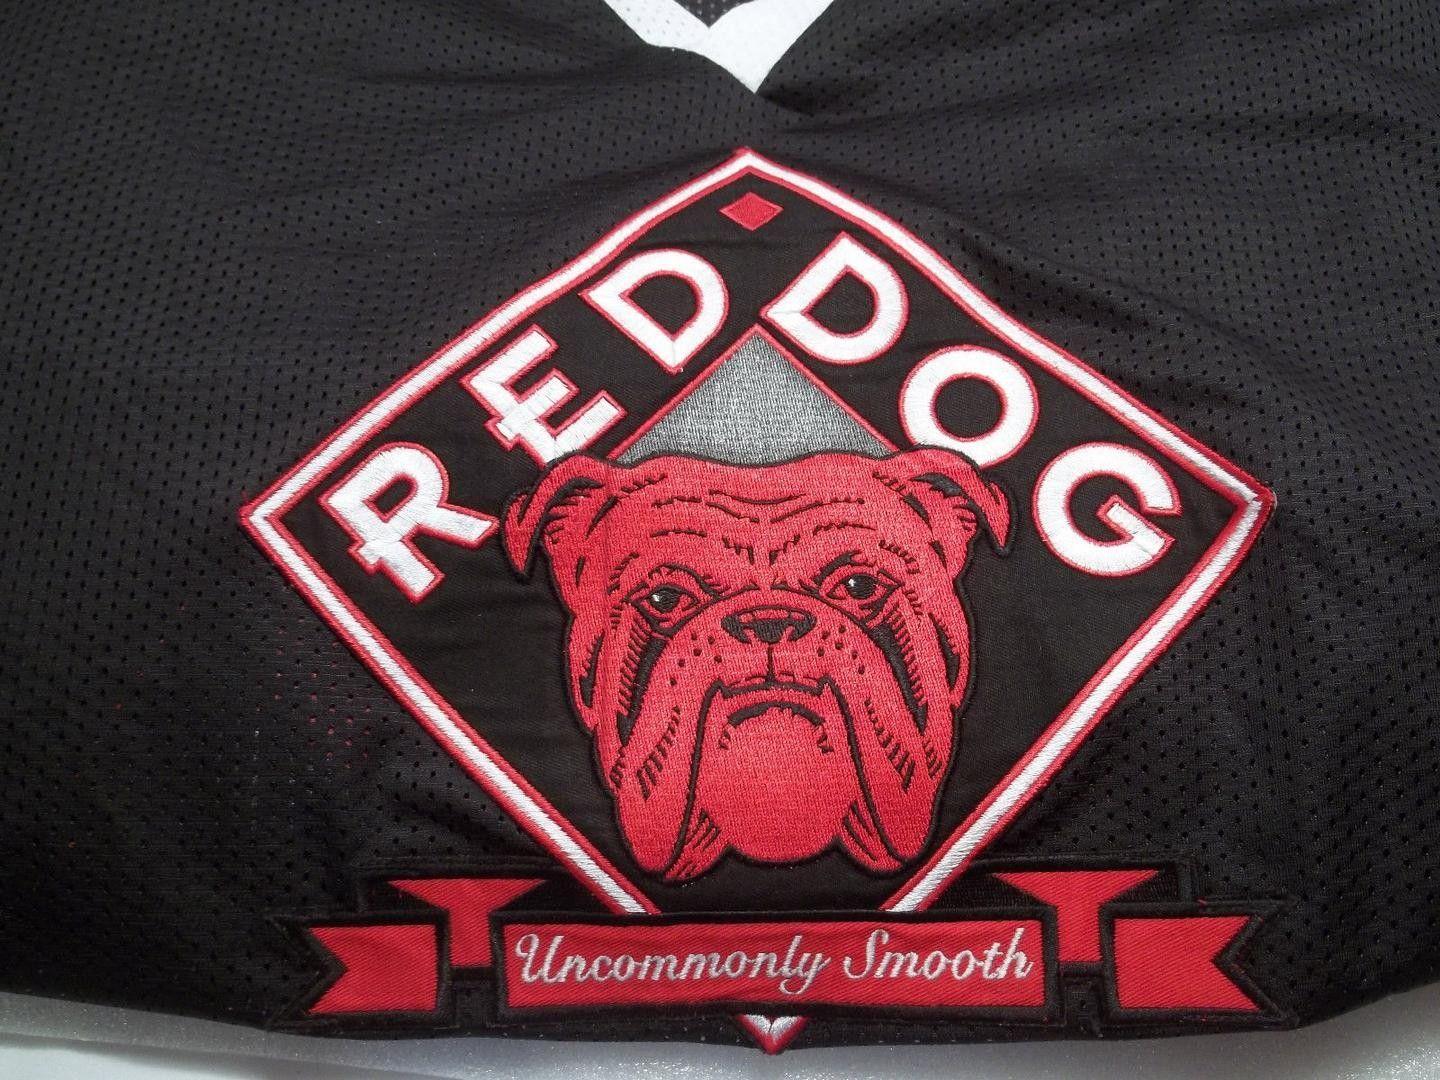 Red Dog Beer Logo - RED DOG BEER HOCKEY JERSEY SEWN / STITCHED LOGO